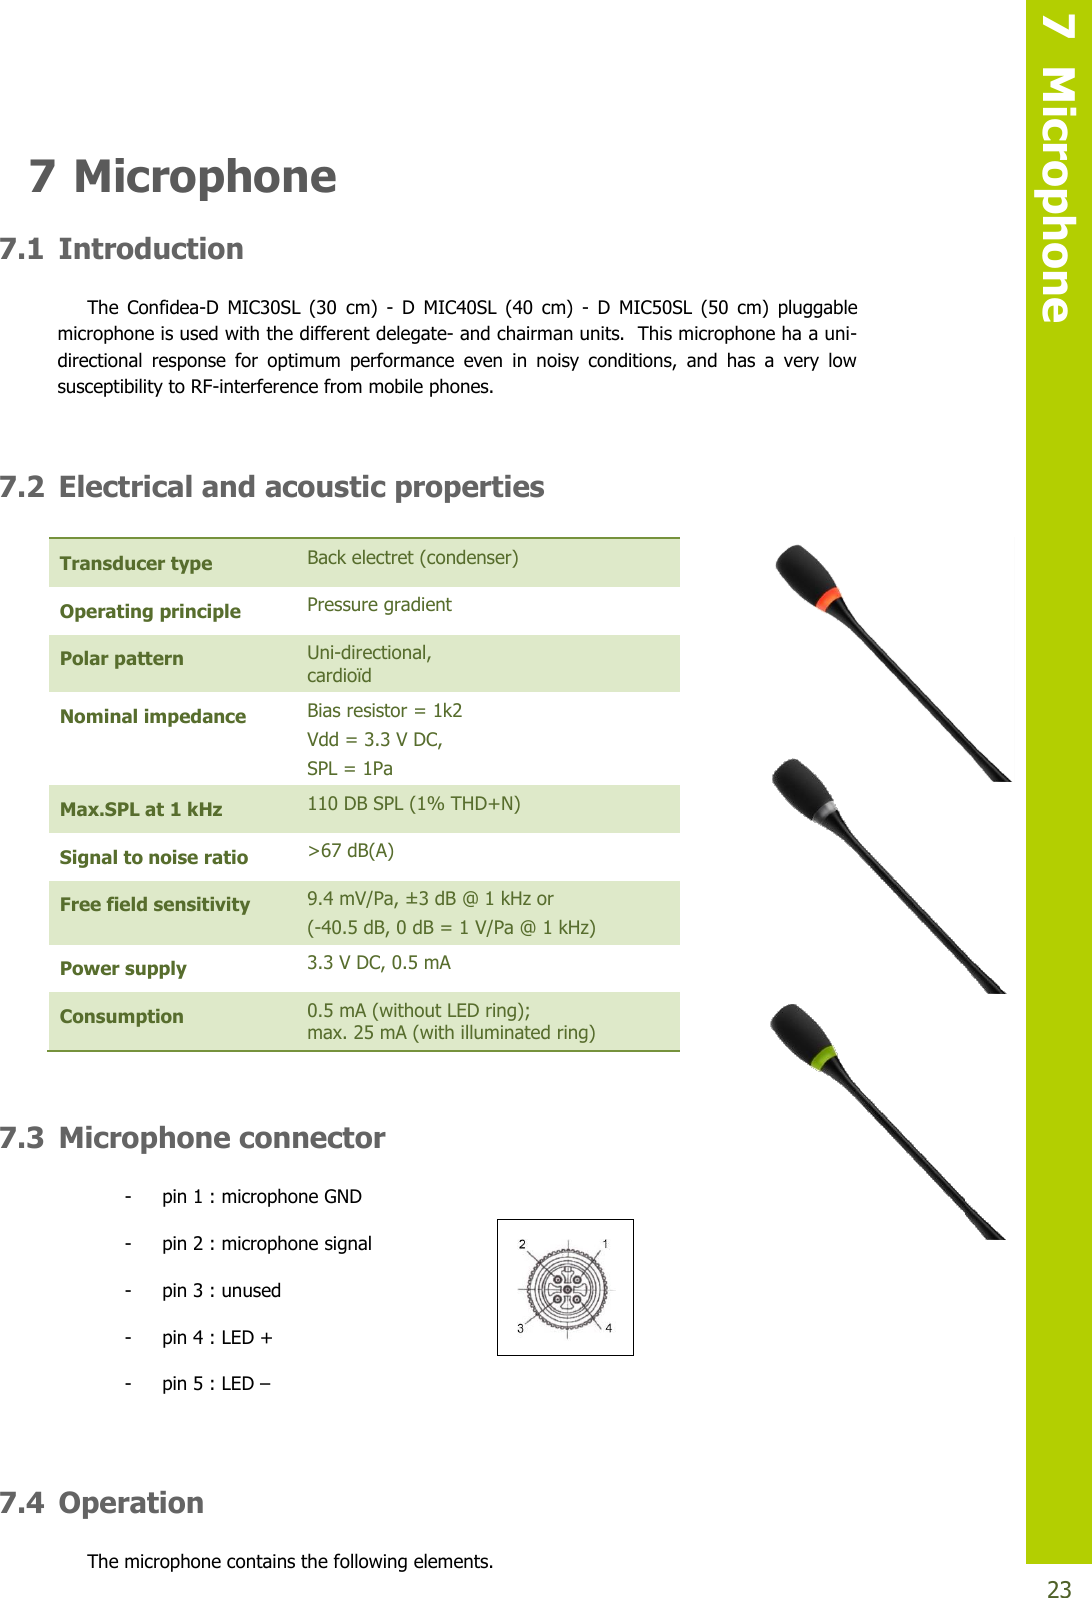   7  Microphone  23 7 Microphone 7.1 Introduction The  Confidea-D  MIC30SL  (30  cm)  -  D  MIC40SL  (40  cm)  -  D  MIC50SL  (50  cm)  pluggable microphone is used with the different delegate- and chairman units.  This microphone ha a uni-directional  response  for  optimum  performance  even  in  noisy  conditions,  and  has  a  very  low susceptibility to RF-interference from mobile phones.  7.2 Electrical and acoustic properties           7.3 Microphone connector - pin 1 : microphone GND - pin 2 : microphone signal - pin 3 : unused - pin 4 : LED + - pin 5 : LED –  7.4 Operation The microphone contains the following elements. Transducer type Back electret (condenser) Operating principle Pressure gradient Polar pattern Uni-directional,  cardioïd Nominal impedance Bias resistor = 1k2 Vdd = 3.3 V DC, SPL = 1Pa Max.SPL at 1 kHz 110 DB SPL (1% THD+N) Signal to noise ratio &gt;67 dB(A) Free field sensitivity 9.4 mV/Pa, ±3 dB @ 1 kHz or (-40.5 dB, 0 dB = 1 V/Pa @ 1 kHz) Power supply 3.3 V DC, 0.5 mA Consumption 0.5 mA (without LED ring);  max. 25 mA (with illuminated ring) 